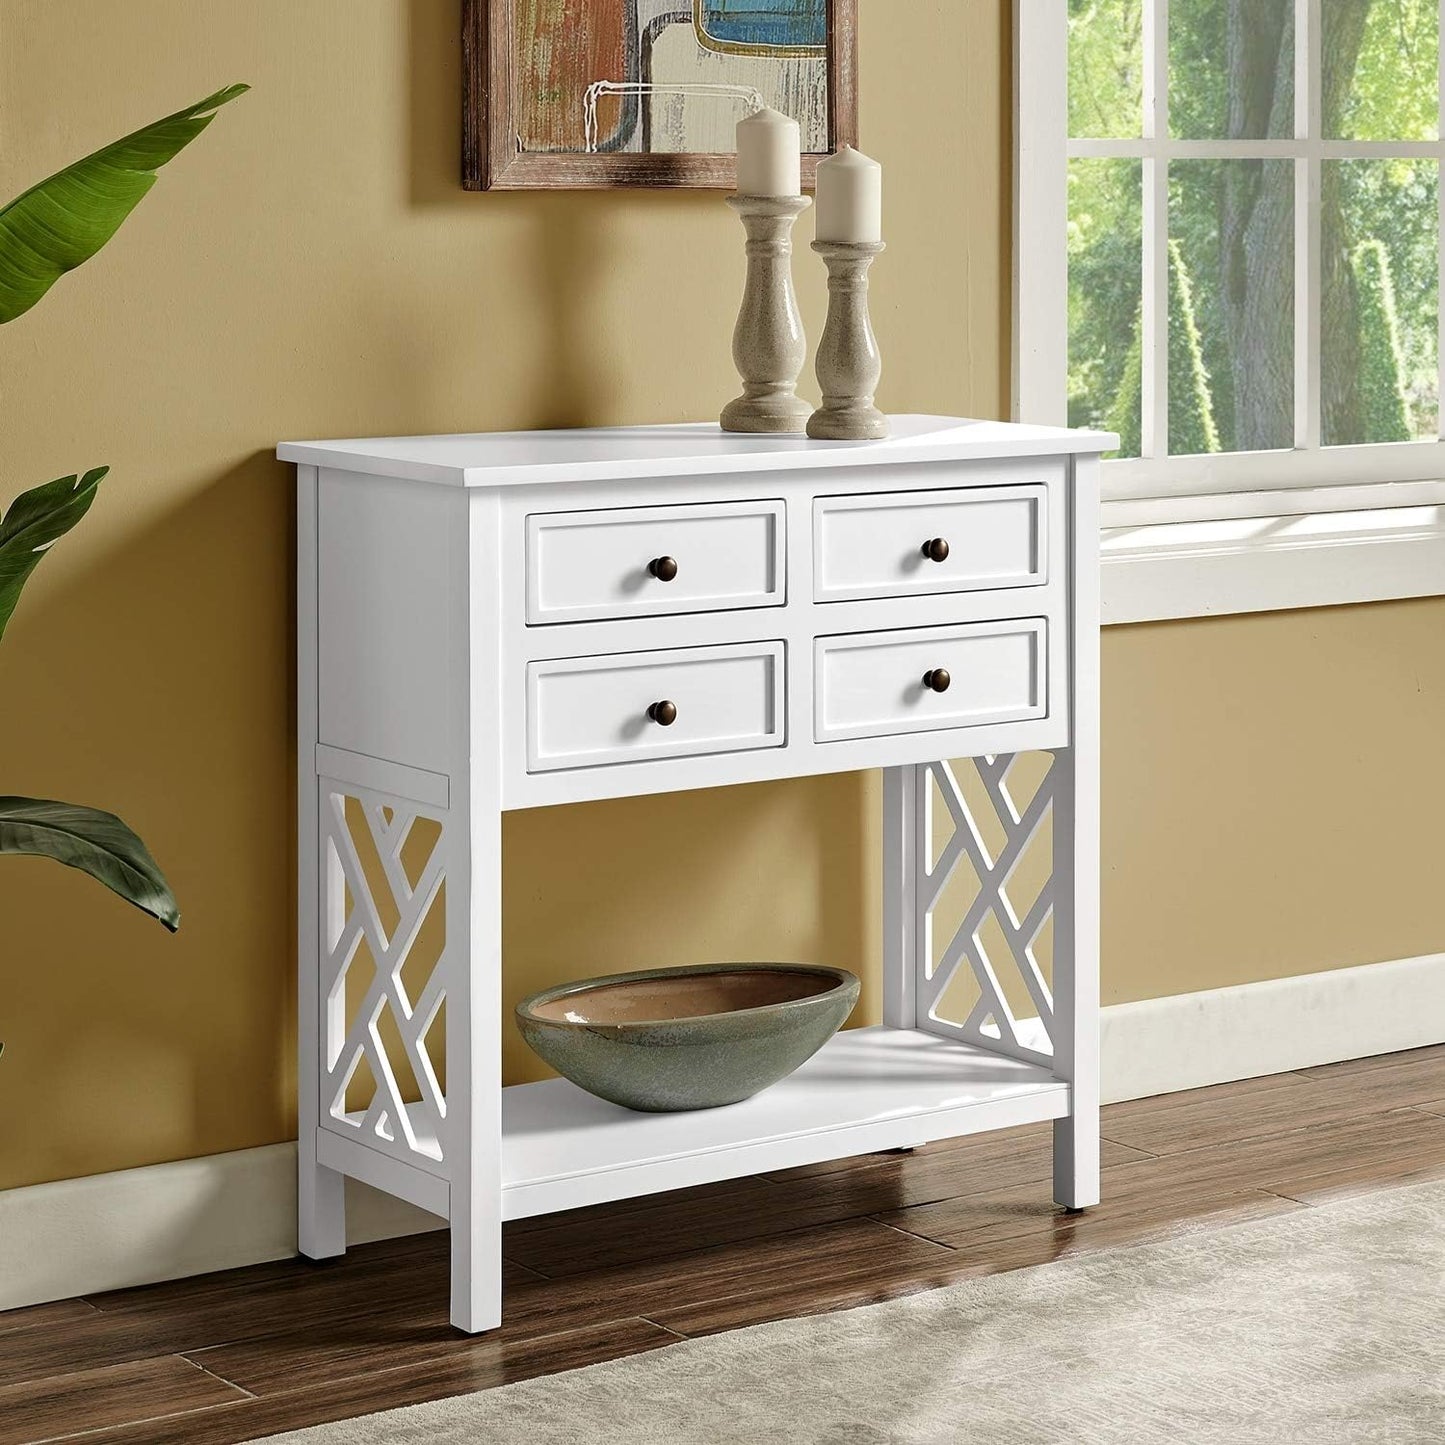 Wood Console Table with 4 Drawers - 32-inch Wide